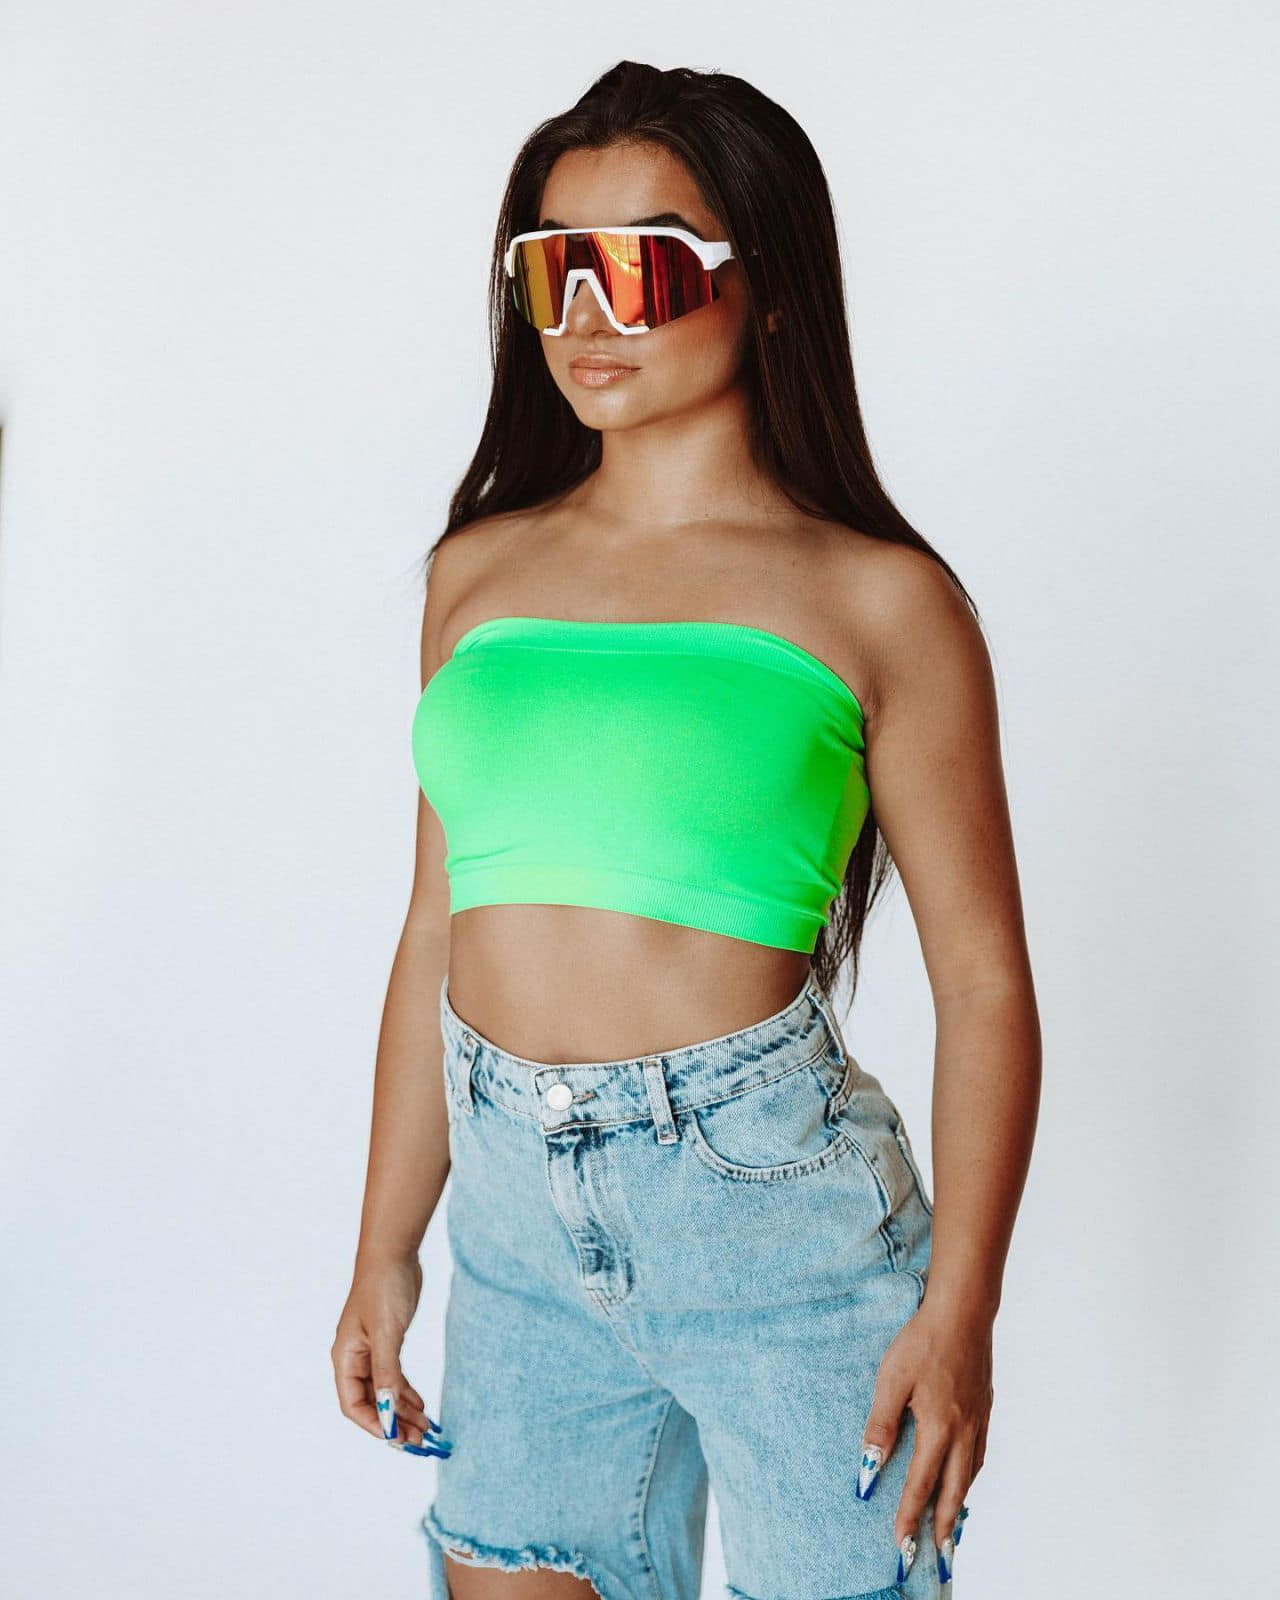 tati mcquay posing in green strapless top and jeans 3